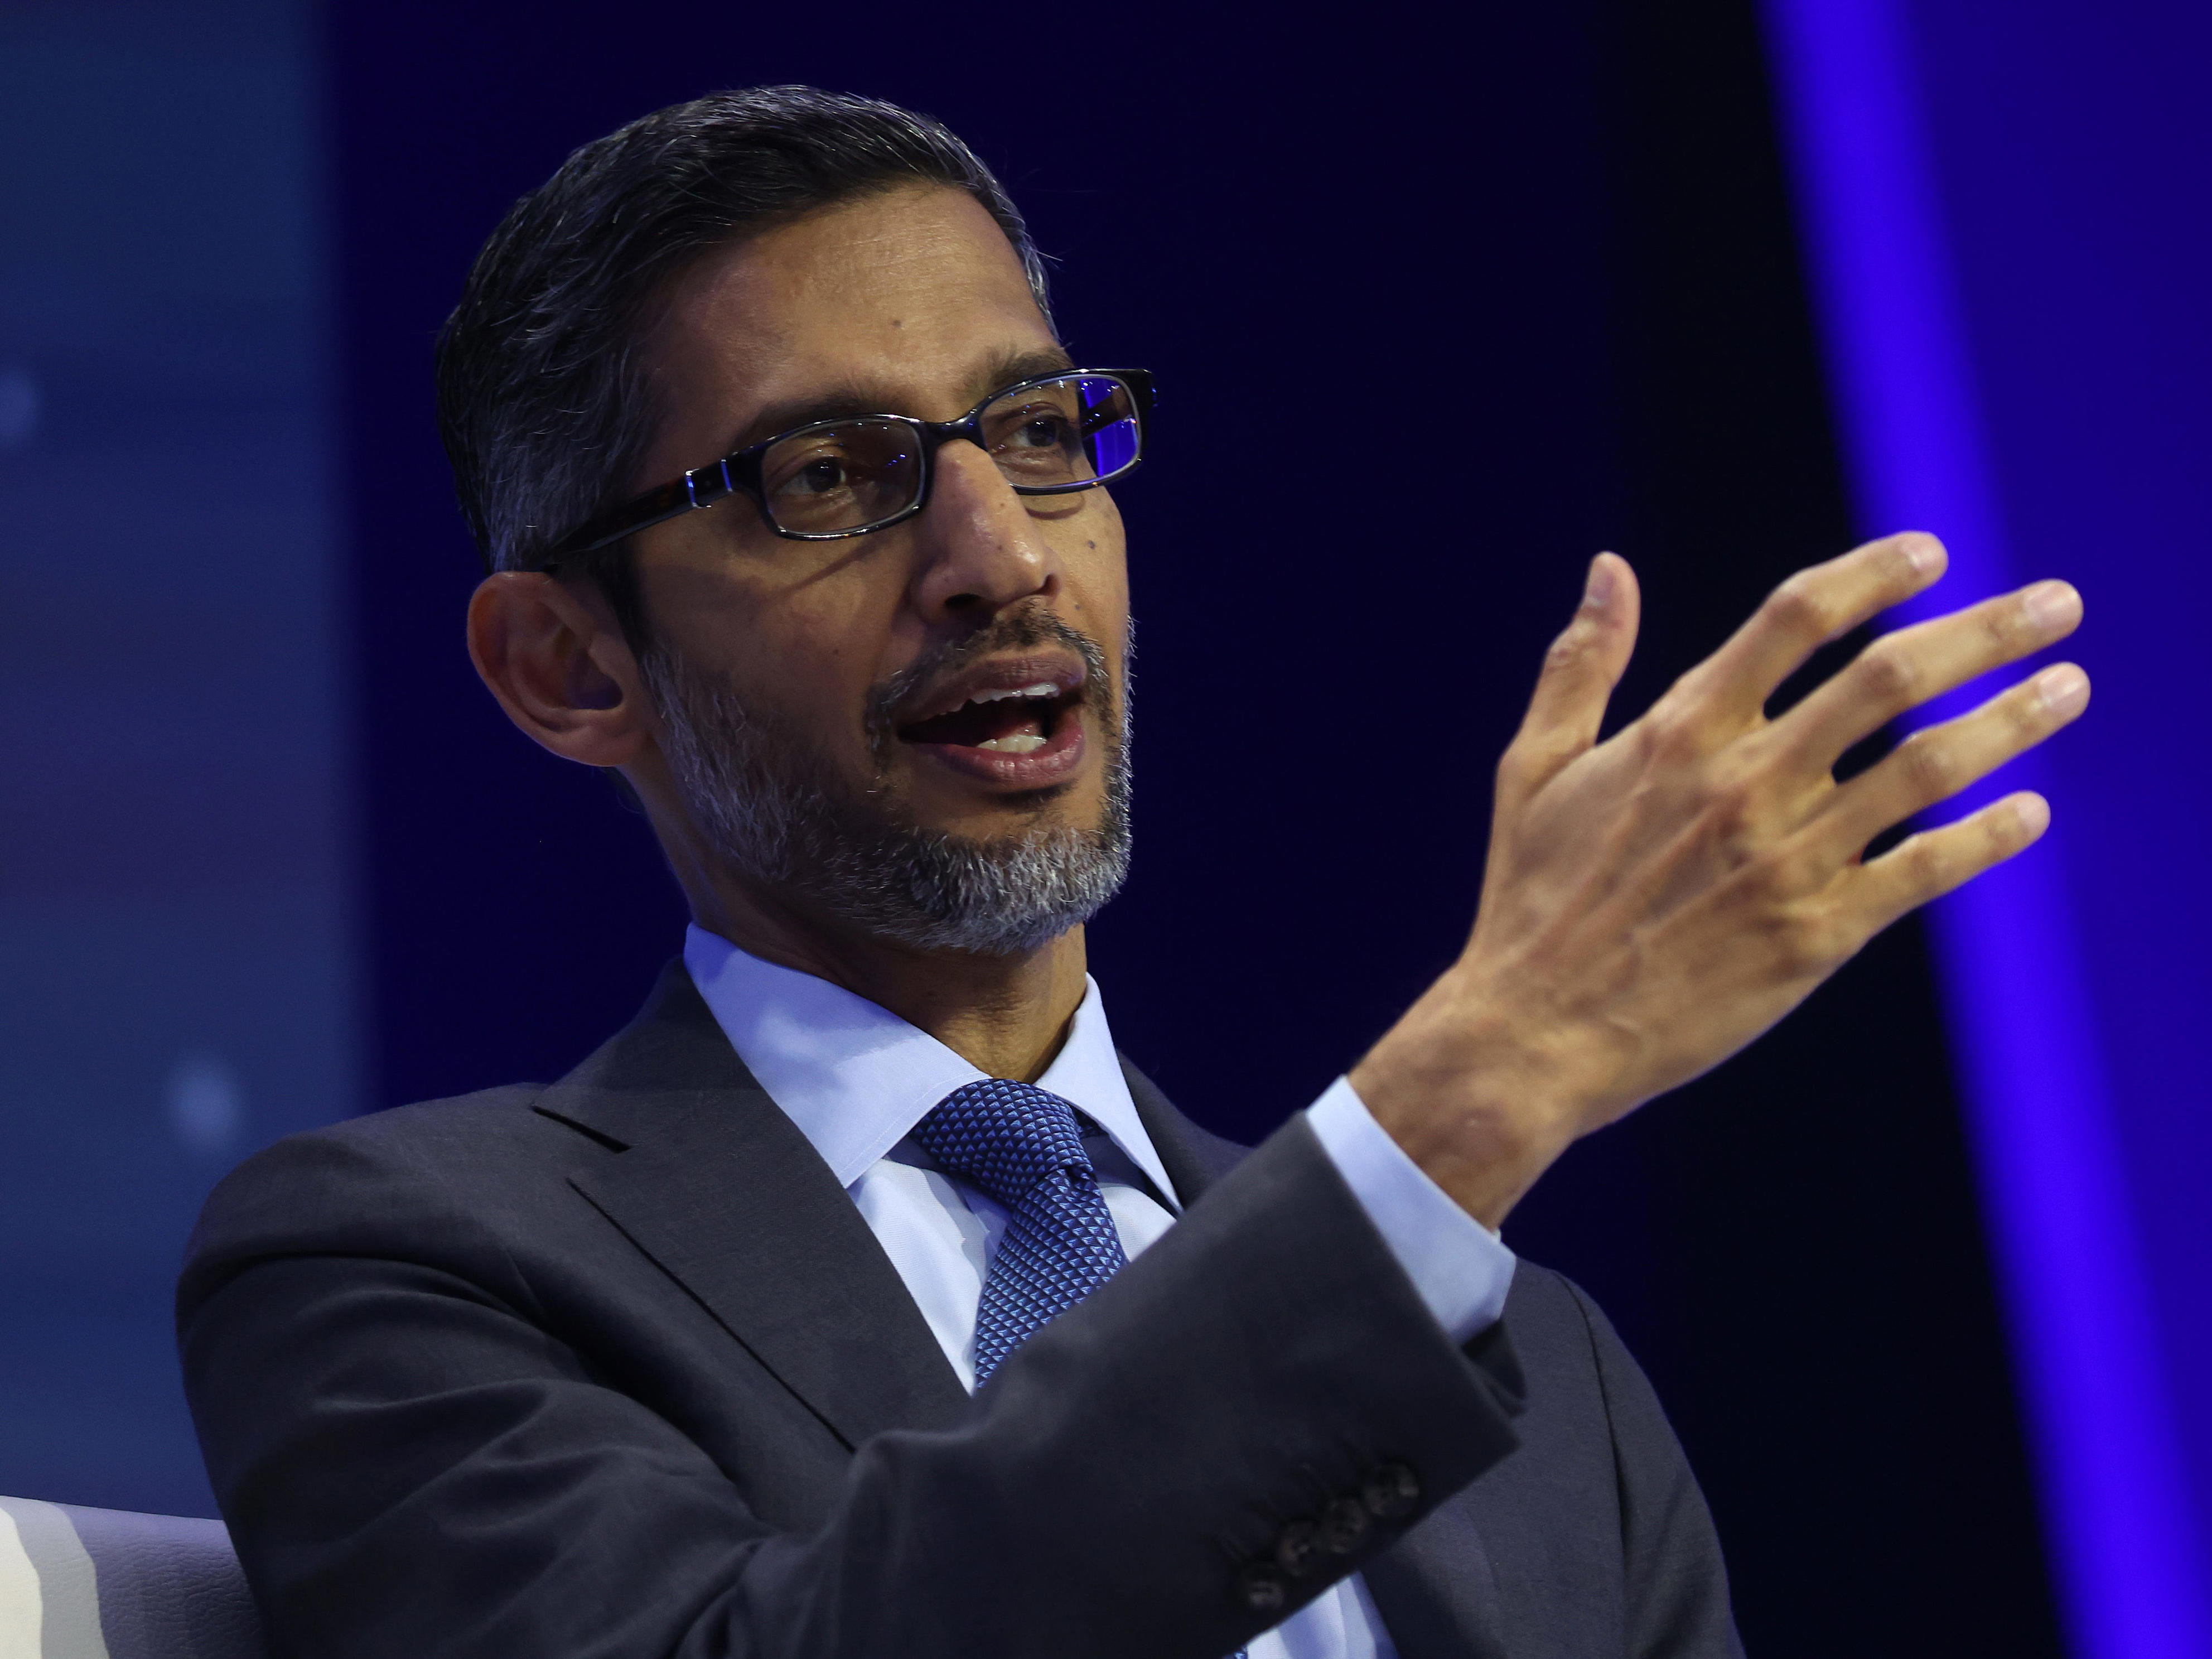 microsoft, google ceo sundar pichai explains why he's not doing layoffs in one fell swoop, but in stages